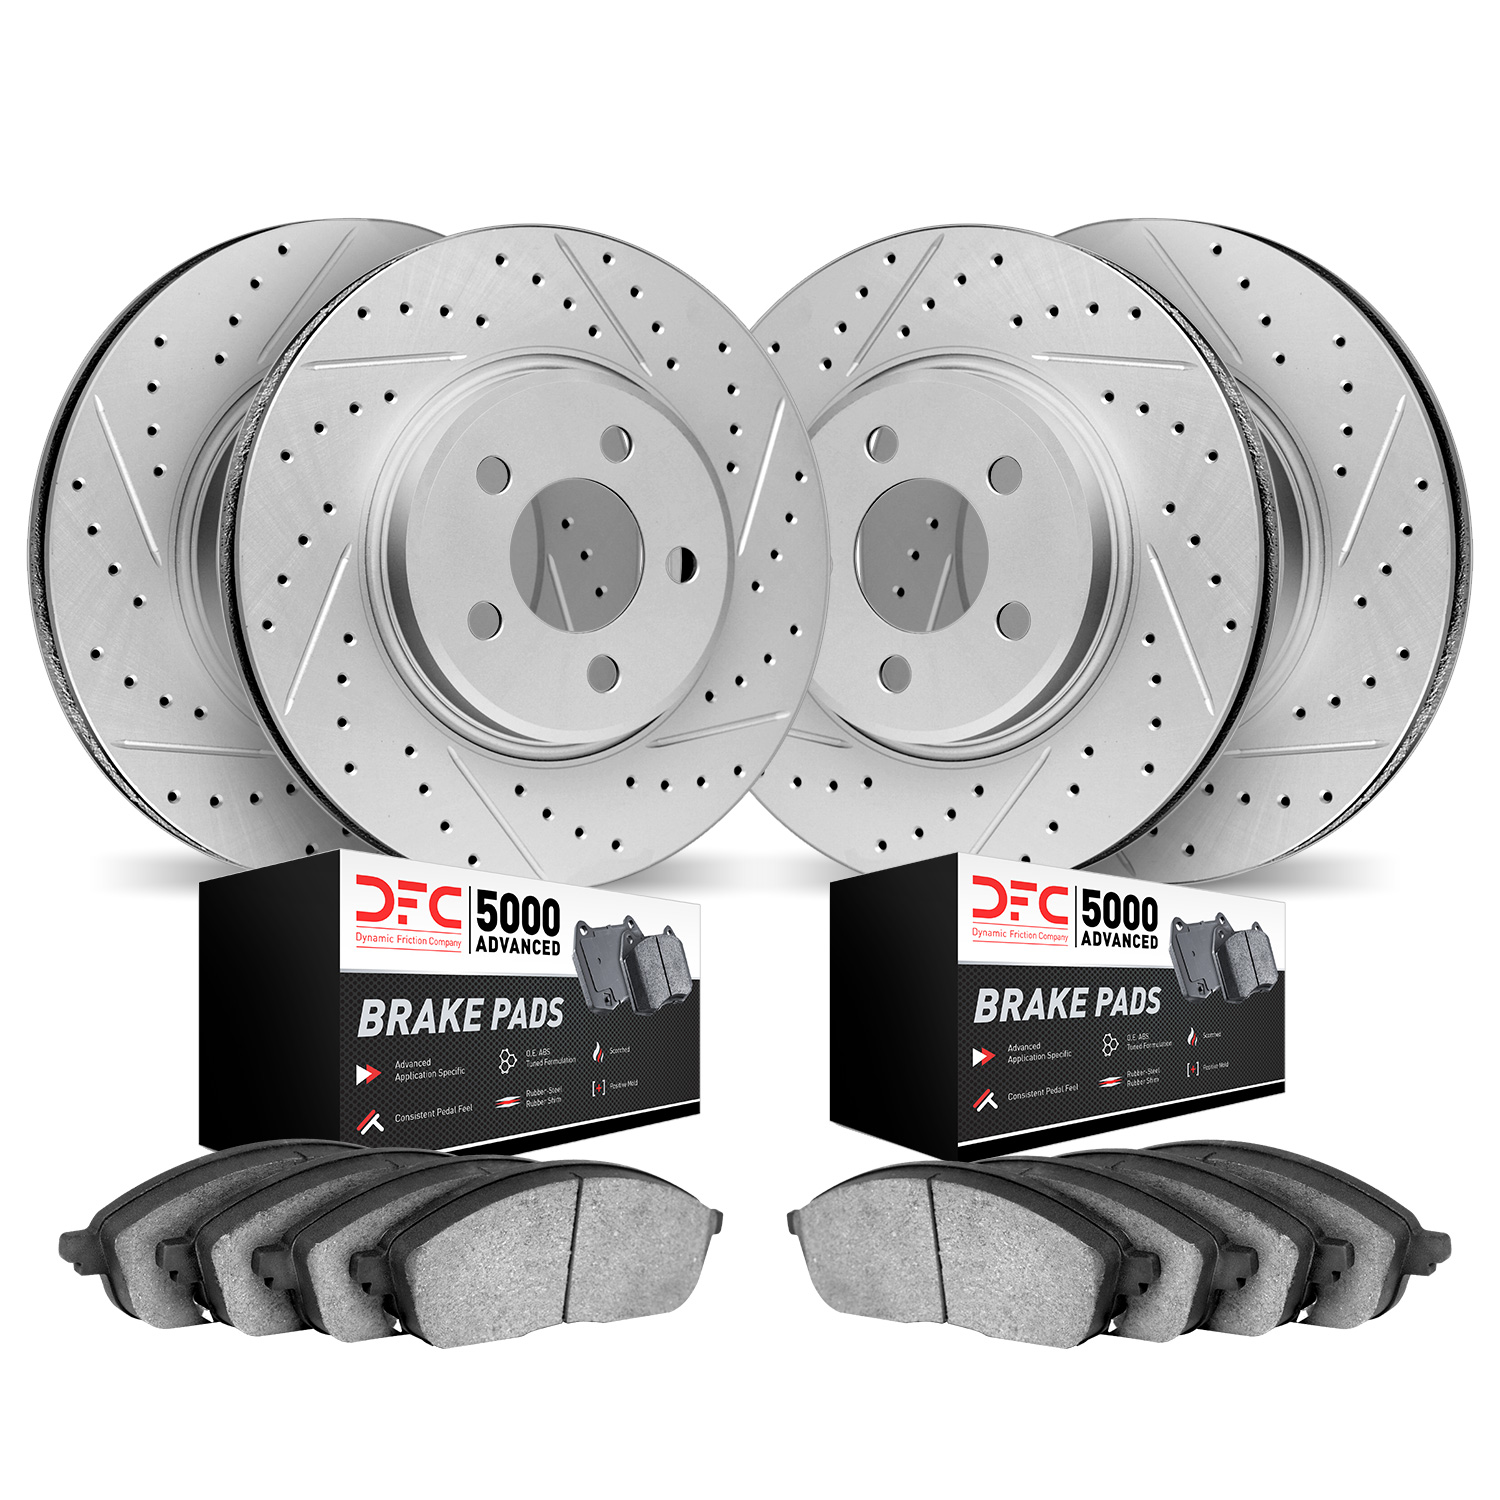 2504-54199 Geoperformance Drilled/Slotted Rotors w/5000 Advanced Brake Pads Kit, 2007-2014 Ford/Lincoln/Mercury/Mazda, Position: